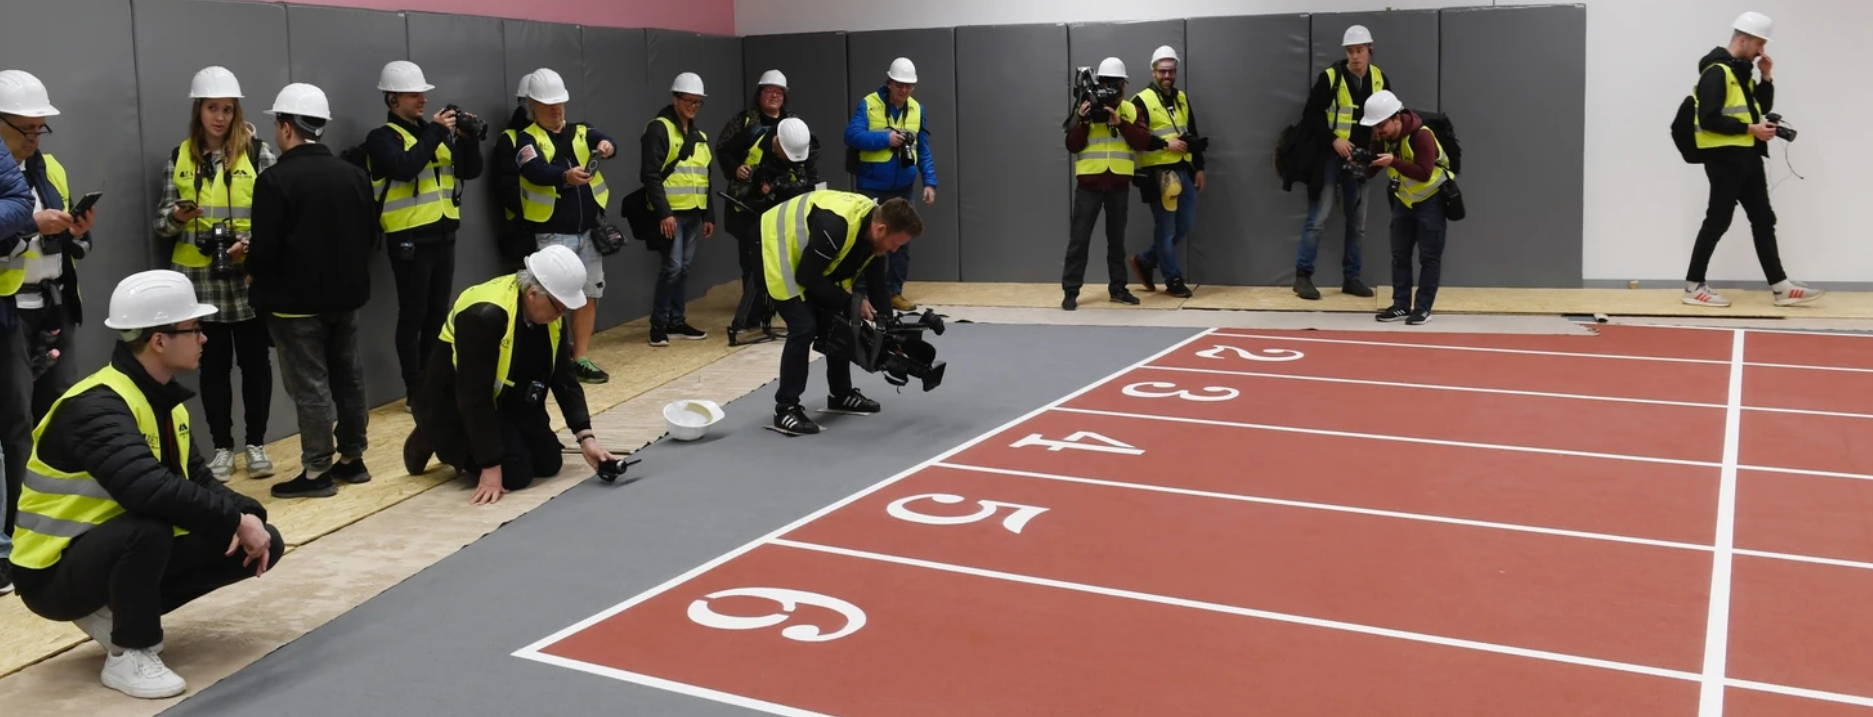 The media get a first look at the newly-finished six-lane indoor track which has been completed at the National Athletics Centre, which will stage this summer's World Athletics Championships ©Budapest 2023